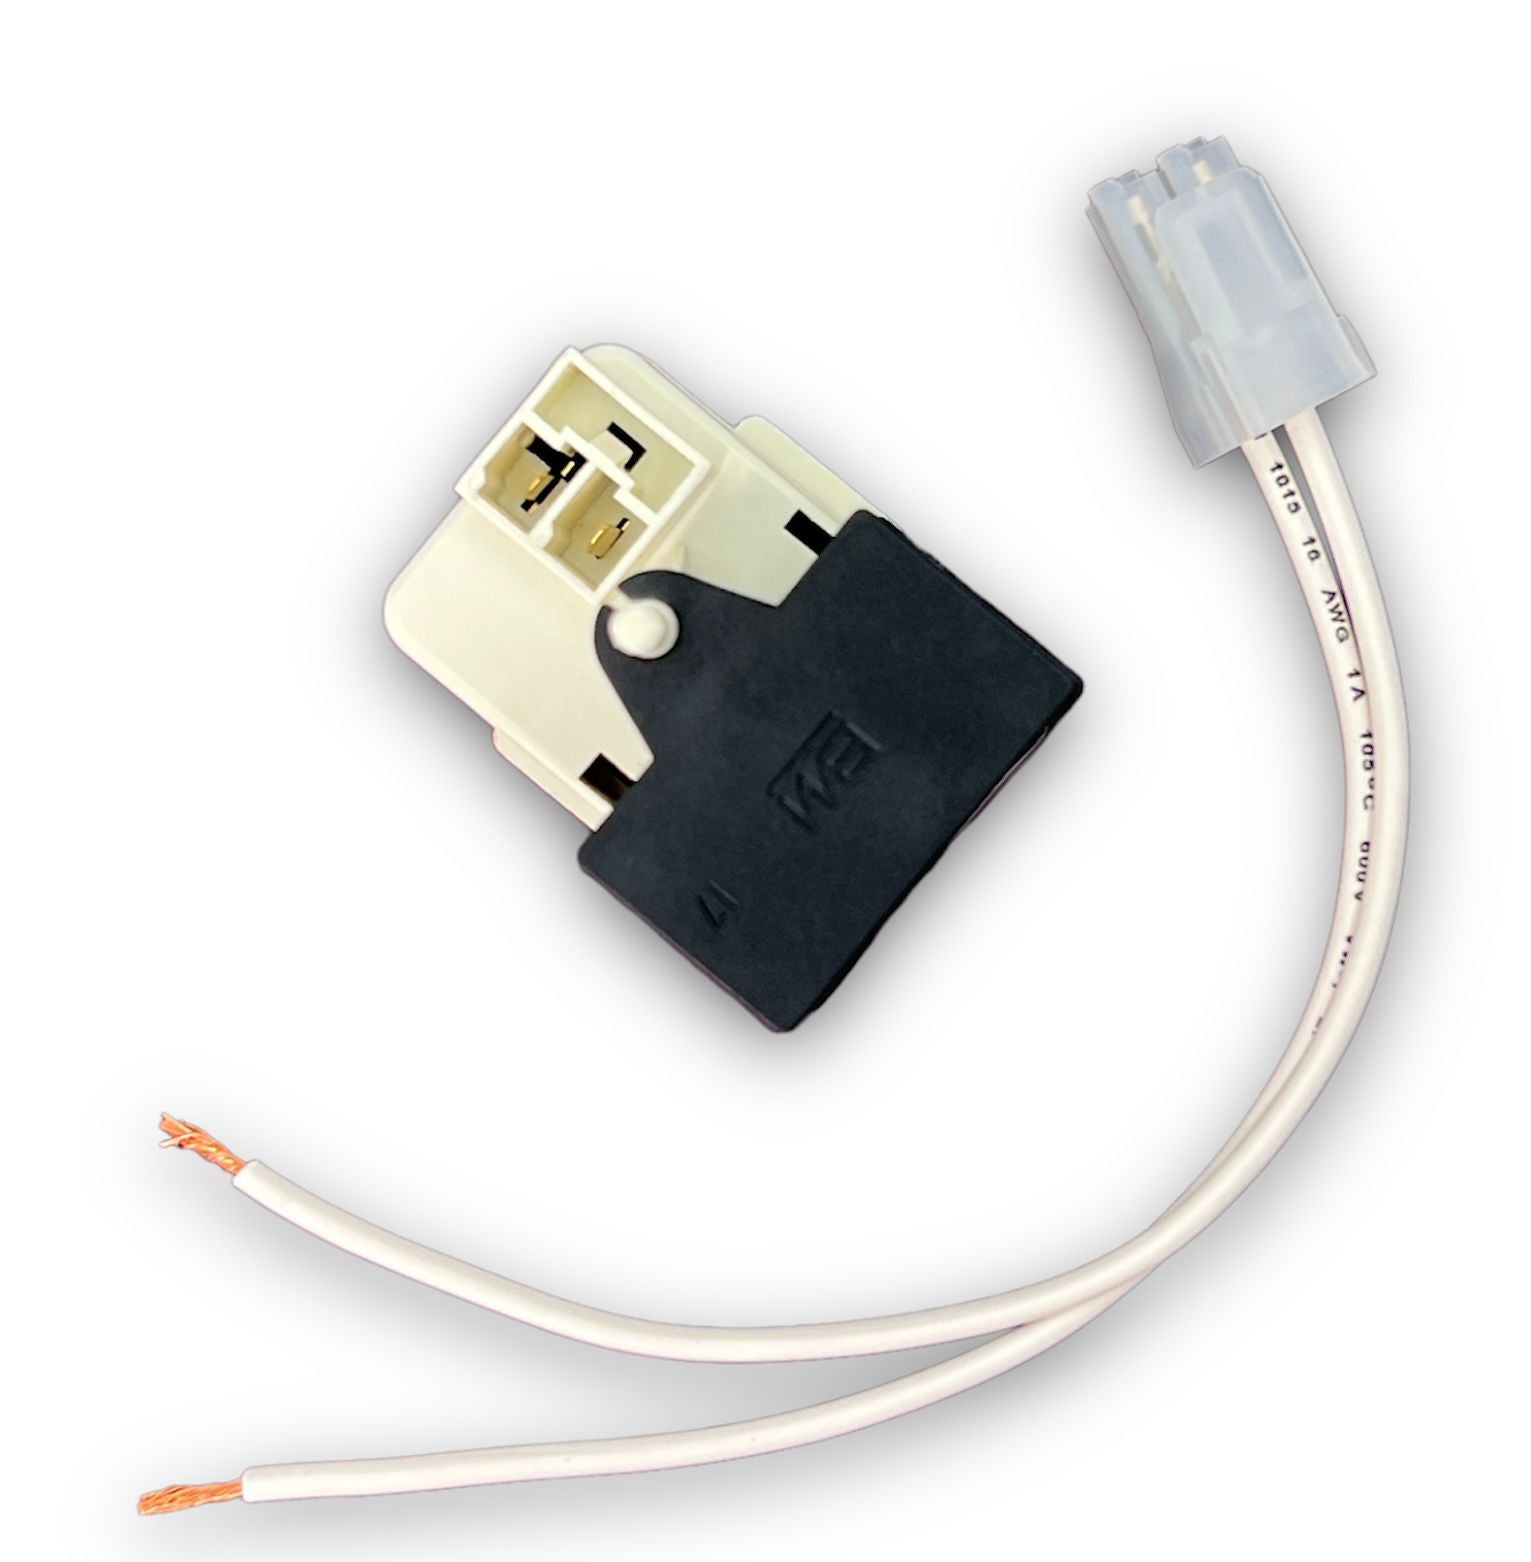 Electrolux Refrigerator Start Device Kit - 297259523 or 297286802, REPLACES: 4451779 AP6031137 PS11765932 EAP11765932 PD00062090 INVERTEC